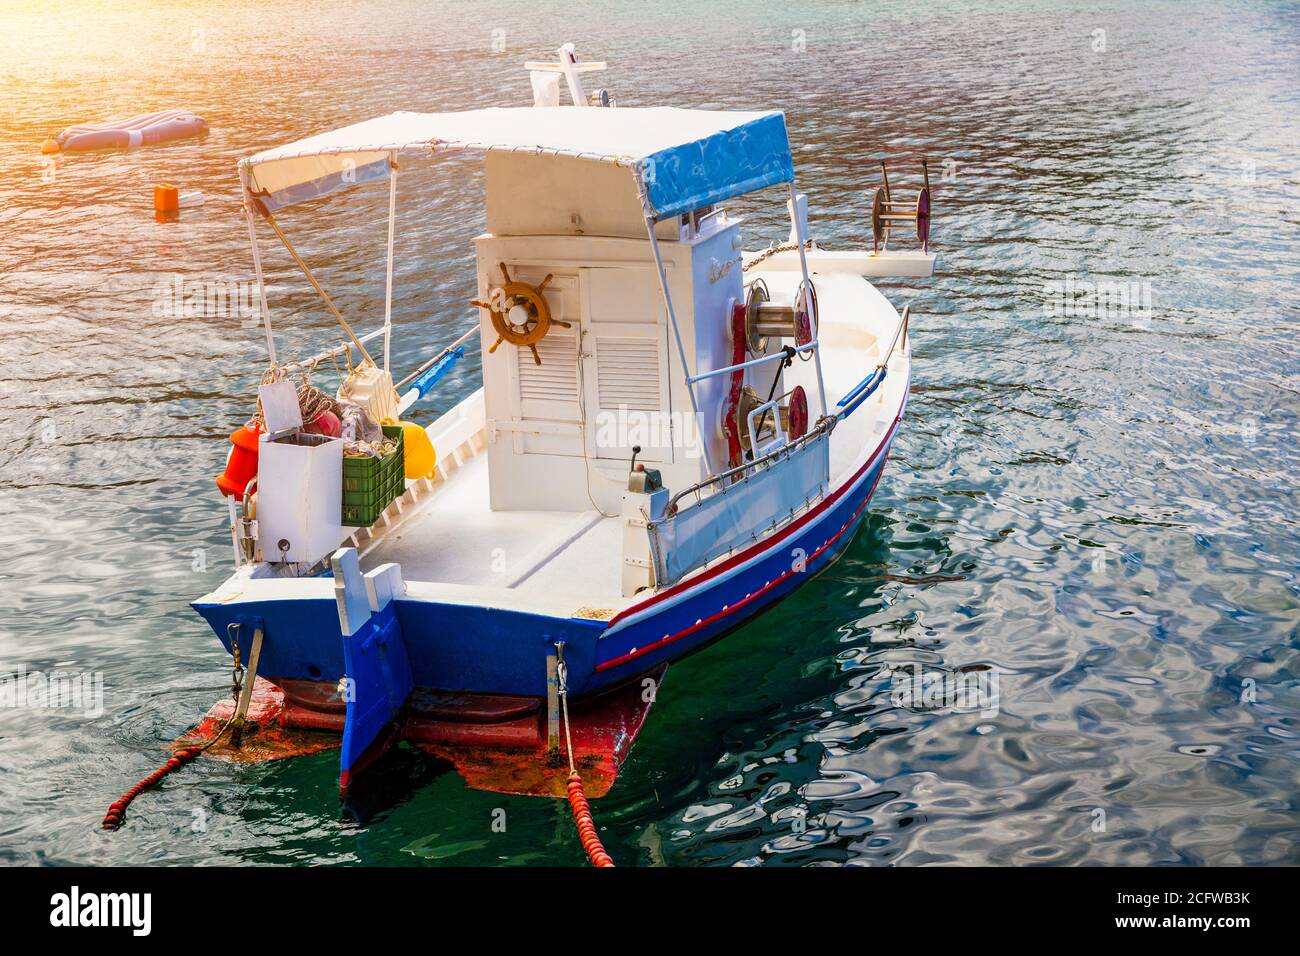 Small Fishing Boat Image & Photo (Free Trial)